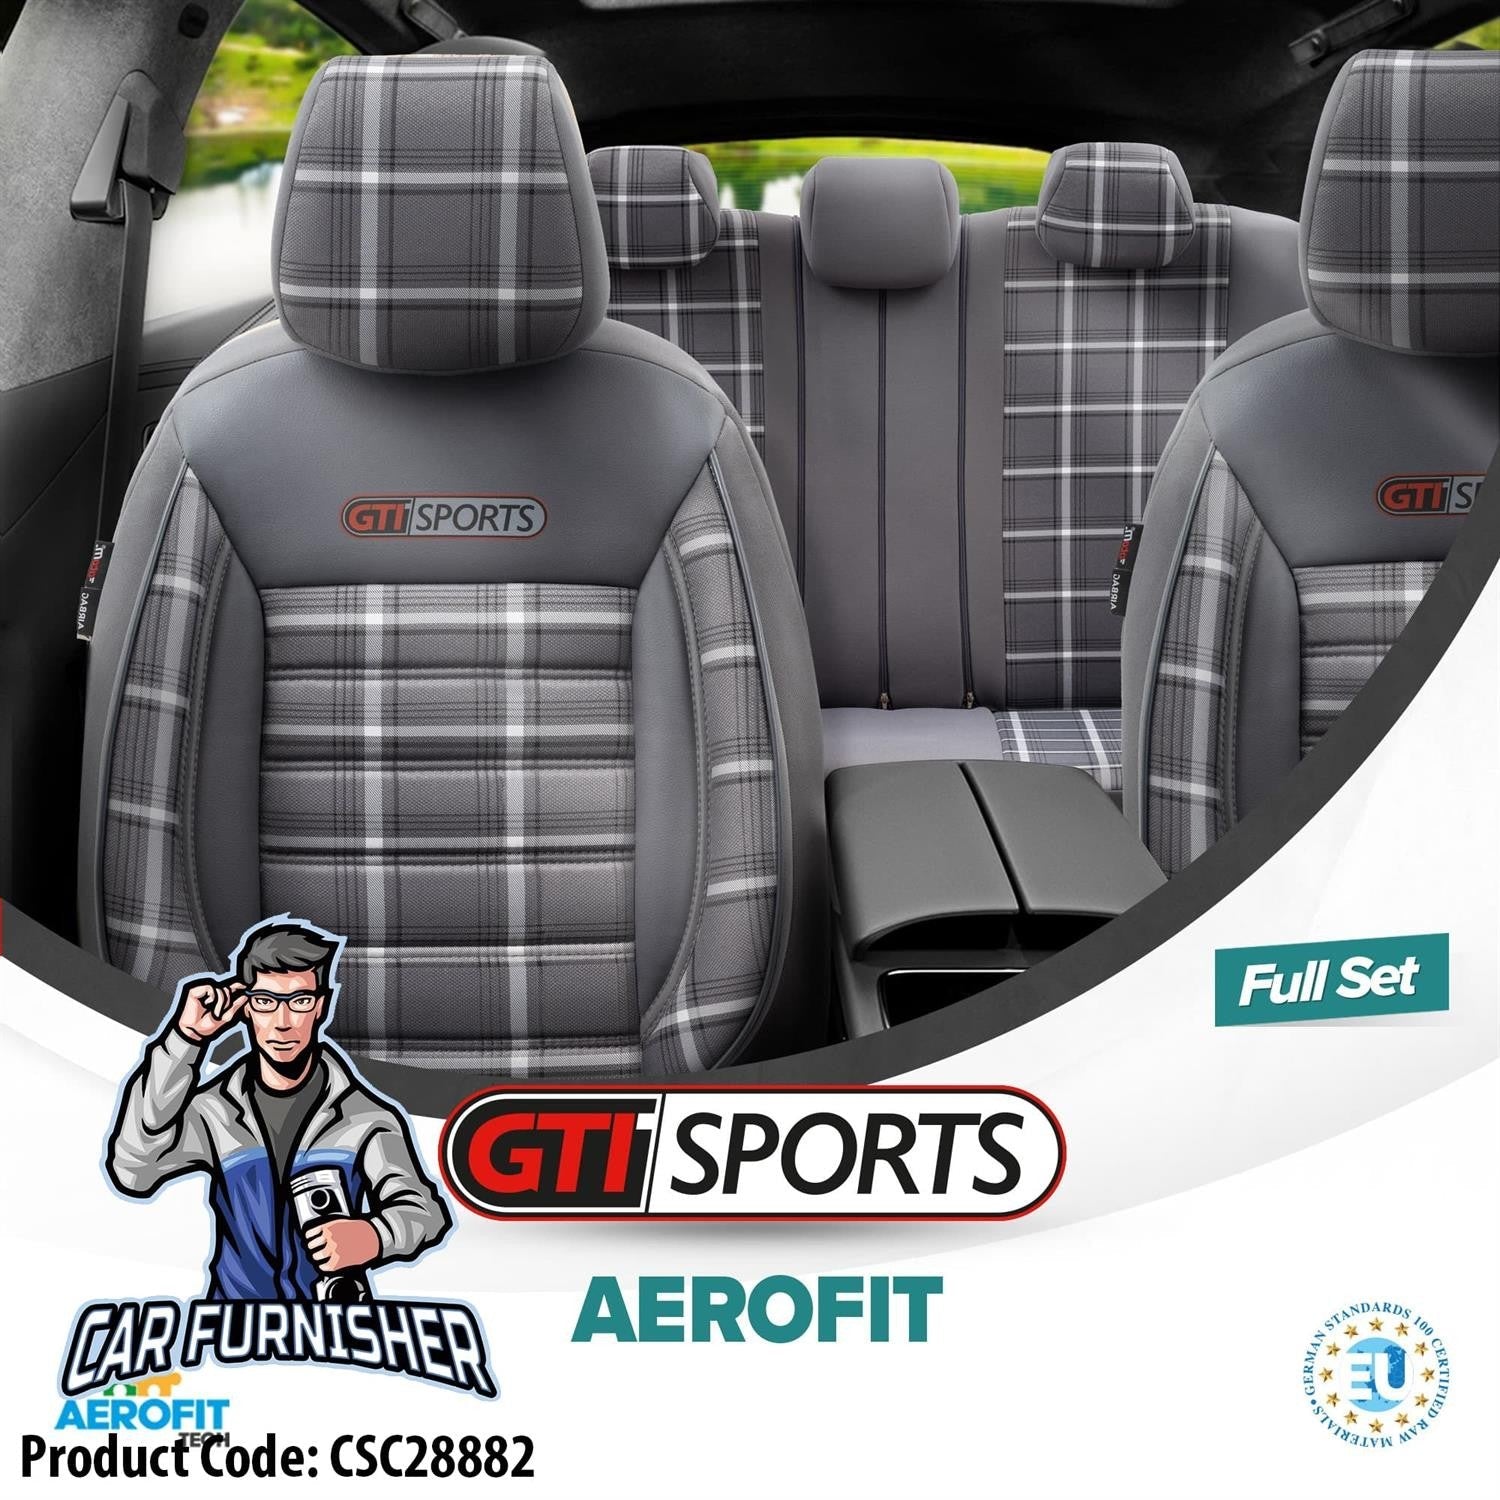 VW Golf GTI Car Seat Covers MK4/MK5/MK6/MK7 1998-2020 Special Series Gray Leather & Fabric